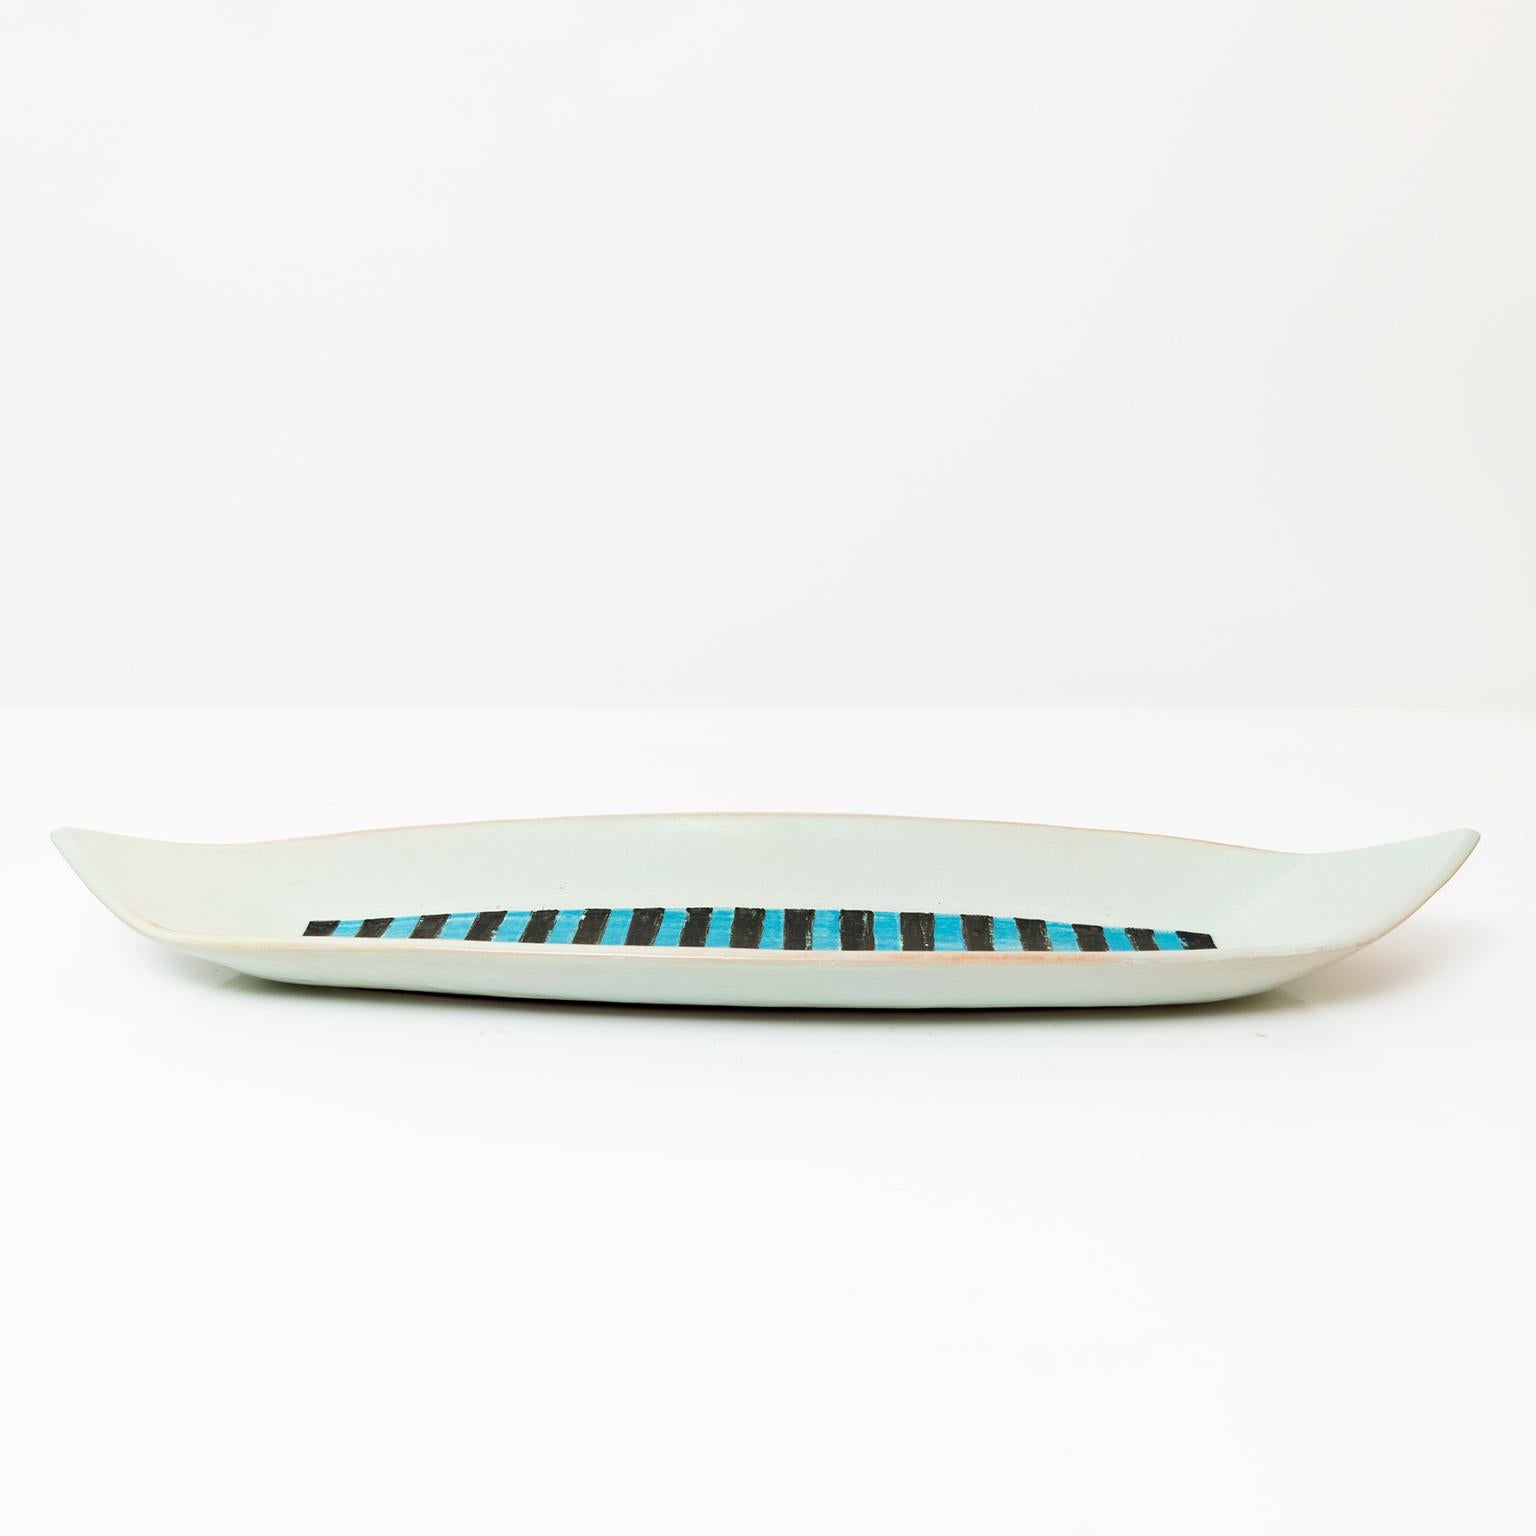 Scandinavian Carl-Harry Stalhane Painted Dish Rorstrand 'D' Sweden, 1950's For Sale